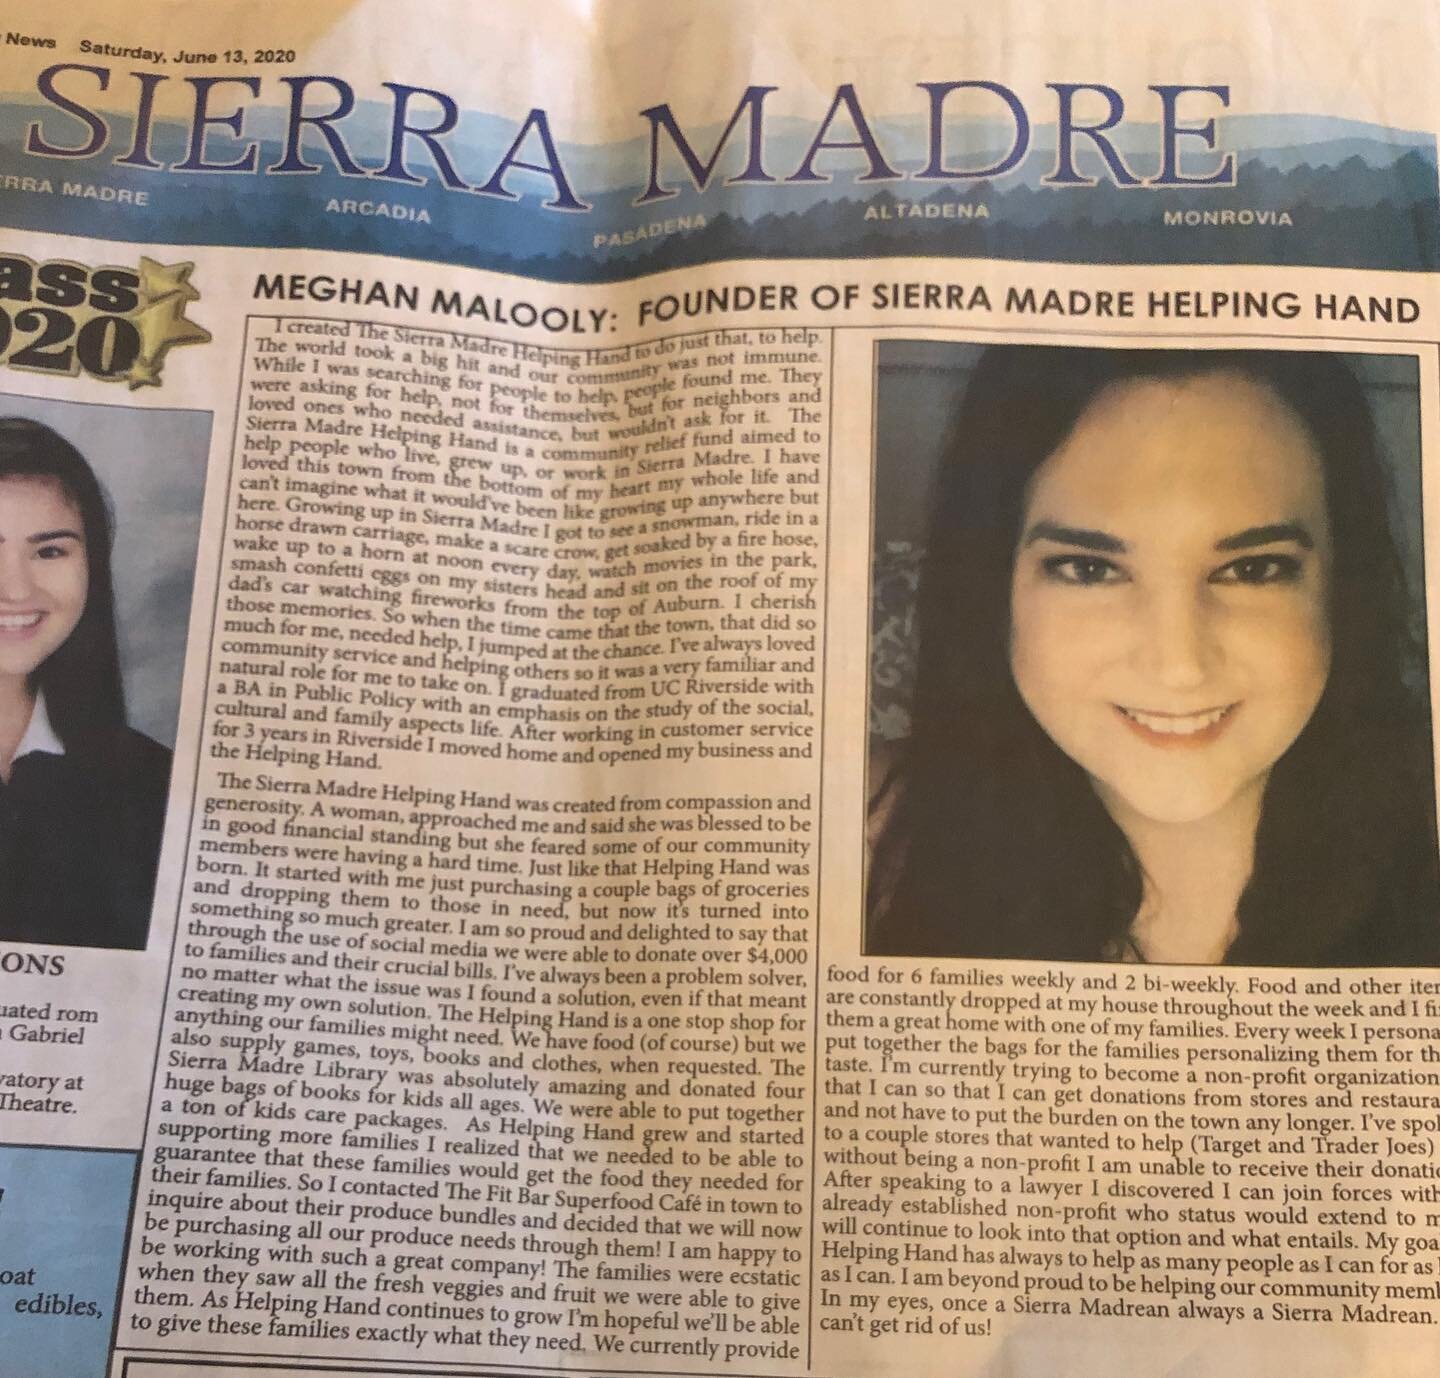 That moment when you&rsquo;re looking at the newspaper and you see your FACE! The Mountain View News had me write an article about the community relief fun I run called The Sierra Madre Helping Hand! I am so honored and proud that Helping Hand was fe